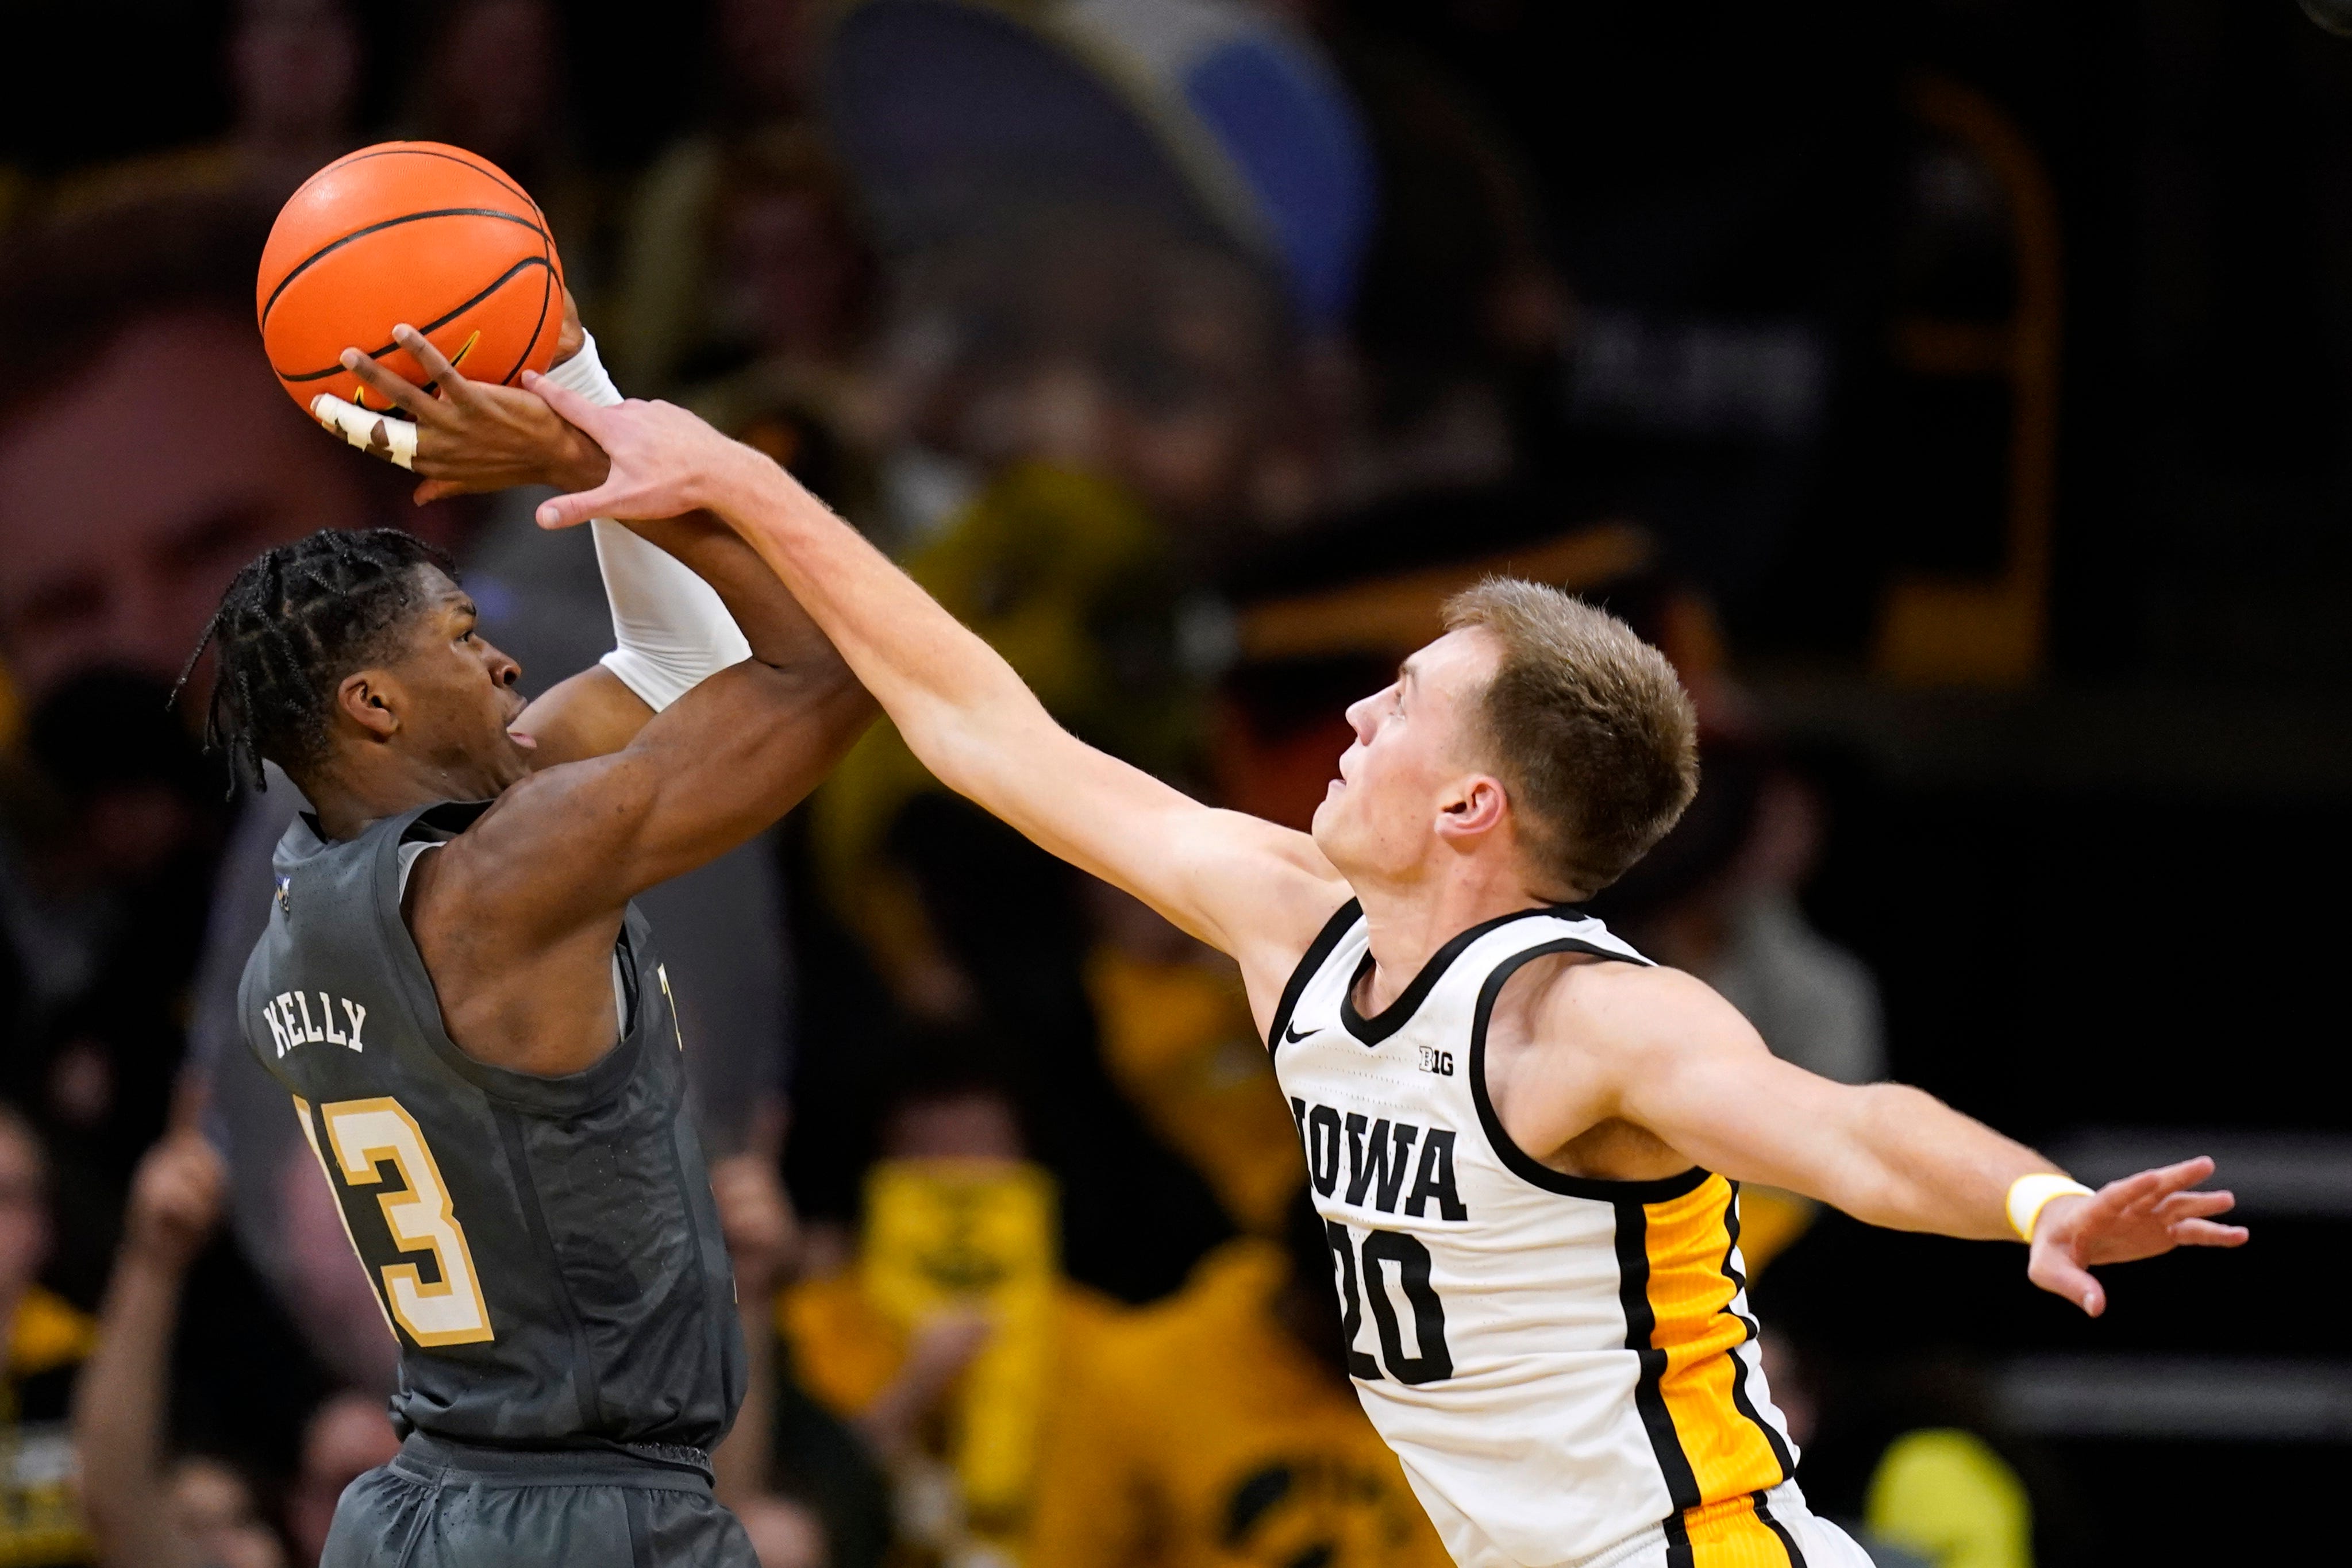 Georgia Tech guard Miles Kelly (13) is fouled by Iowa forward Payton Sandfort (20) during the second half of an NCAA college basketball game, Tuesday, Nov. 29, 2022, in Iowa City, Iowa.